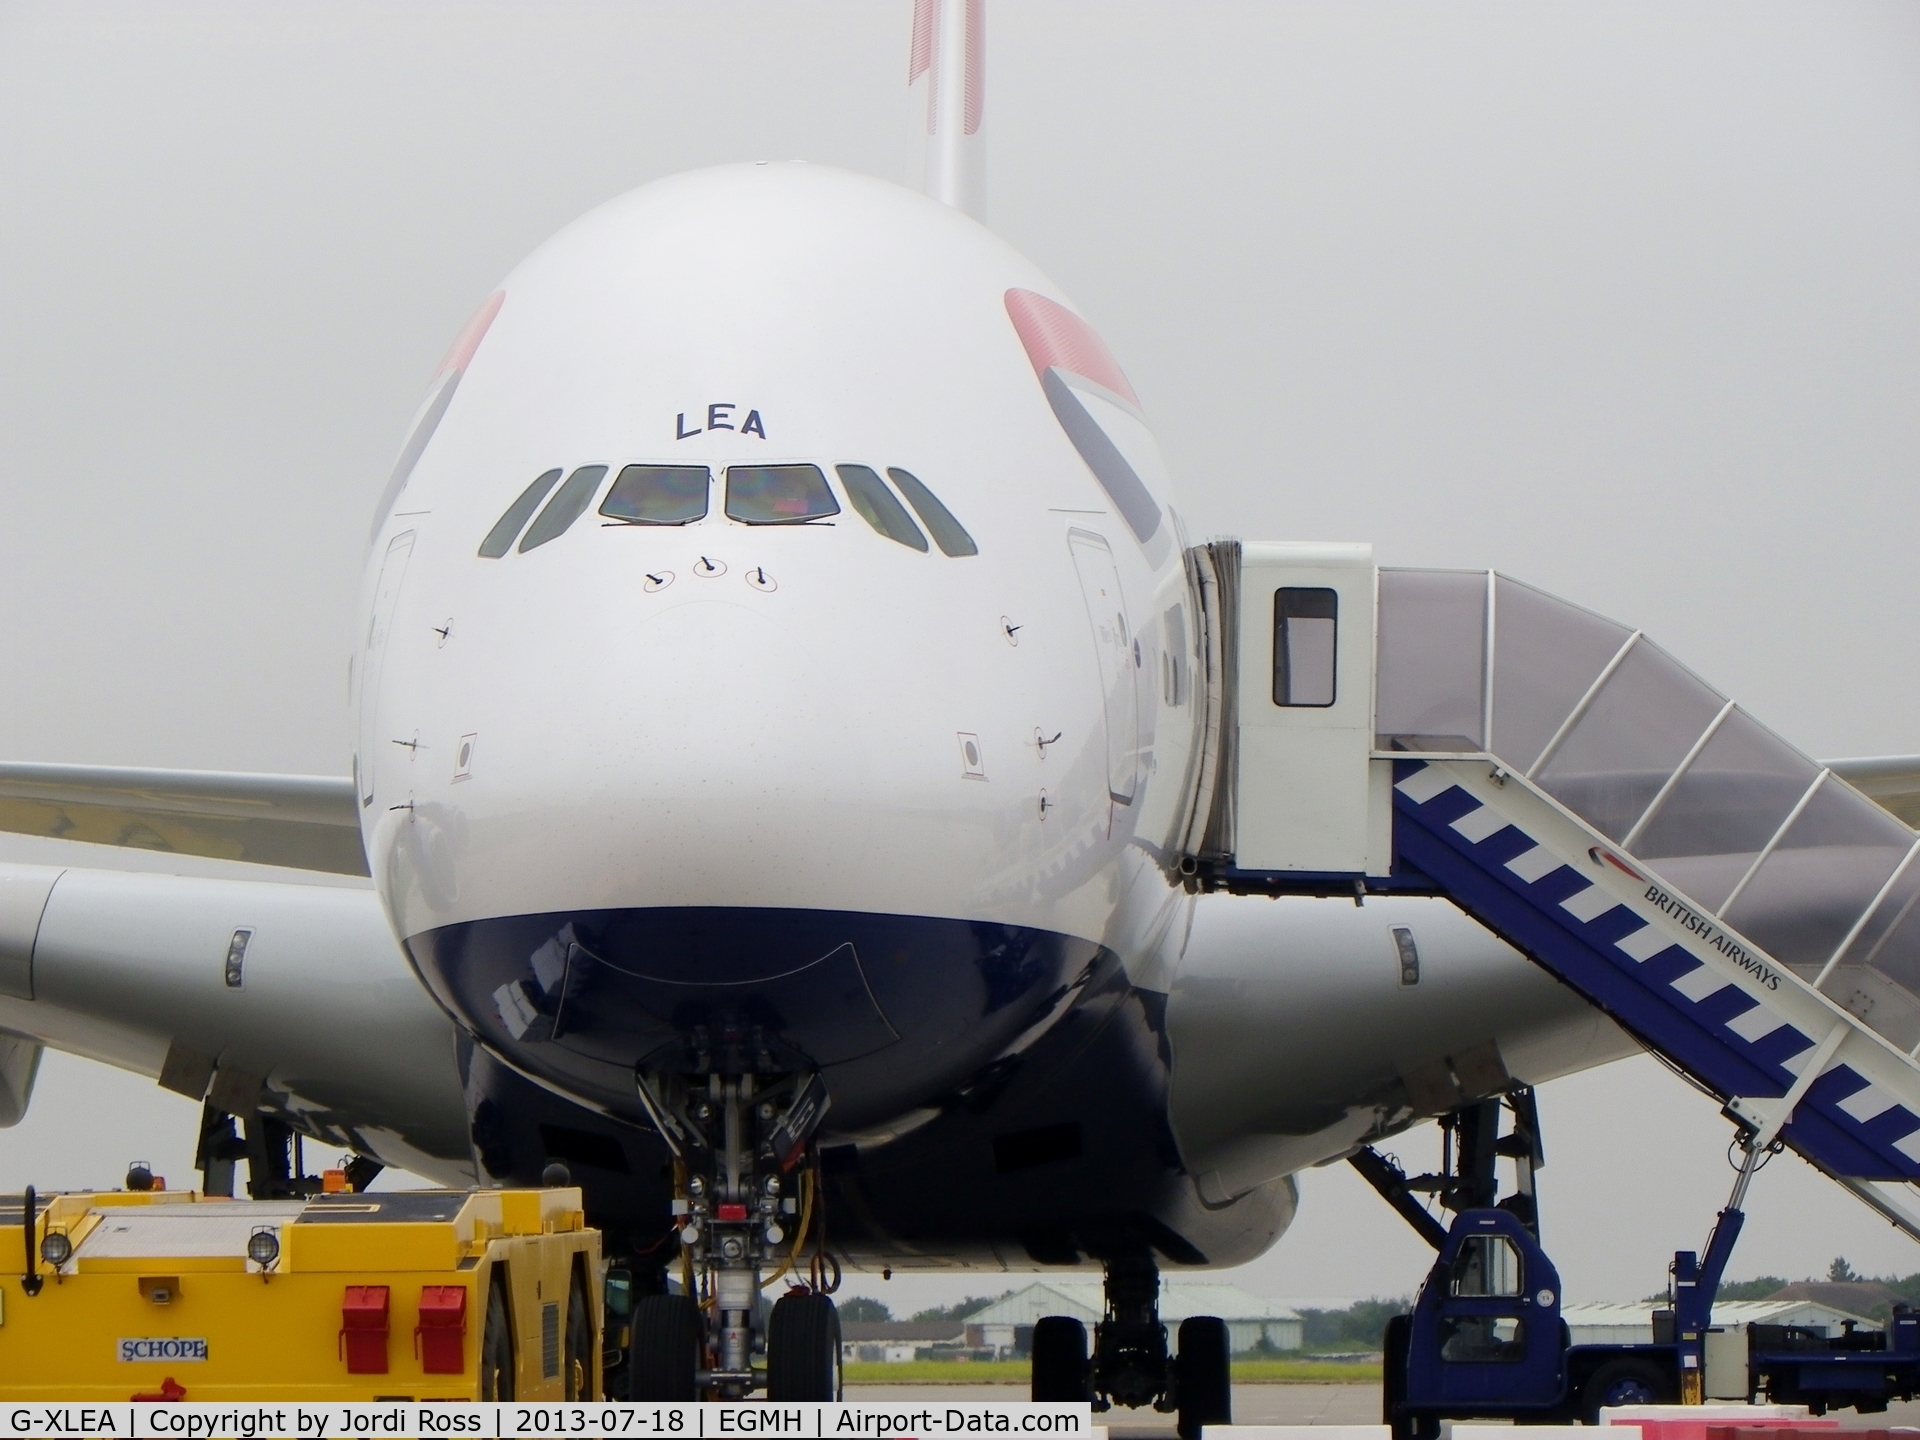 G-XLEA, 2012 Airbus A380-841 C/N 095, AT Manston for crew training